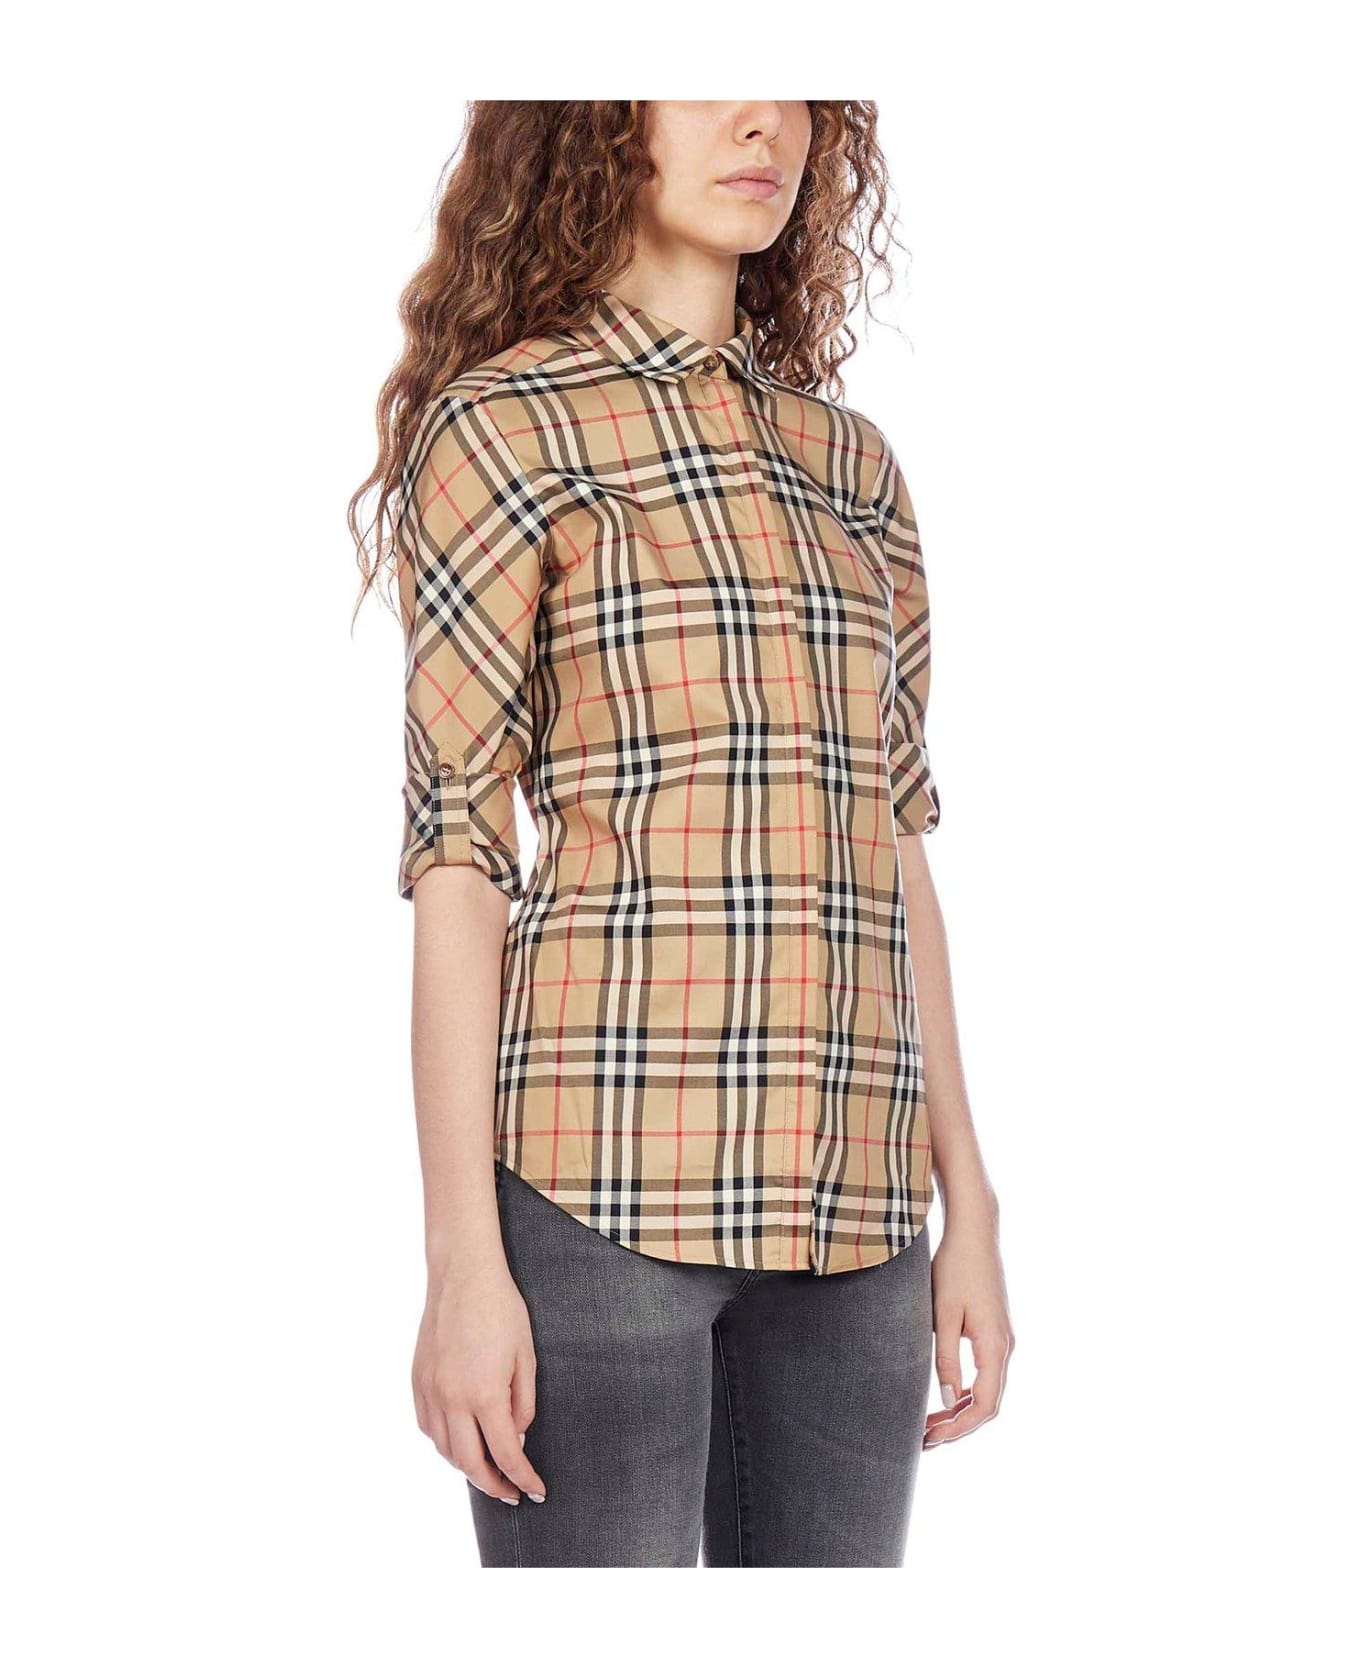 Burberry Vintage Checked Short-sleeved Shirt - Beige シャツ